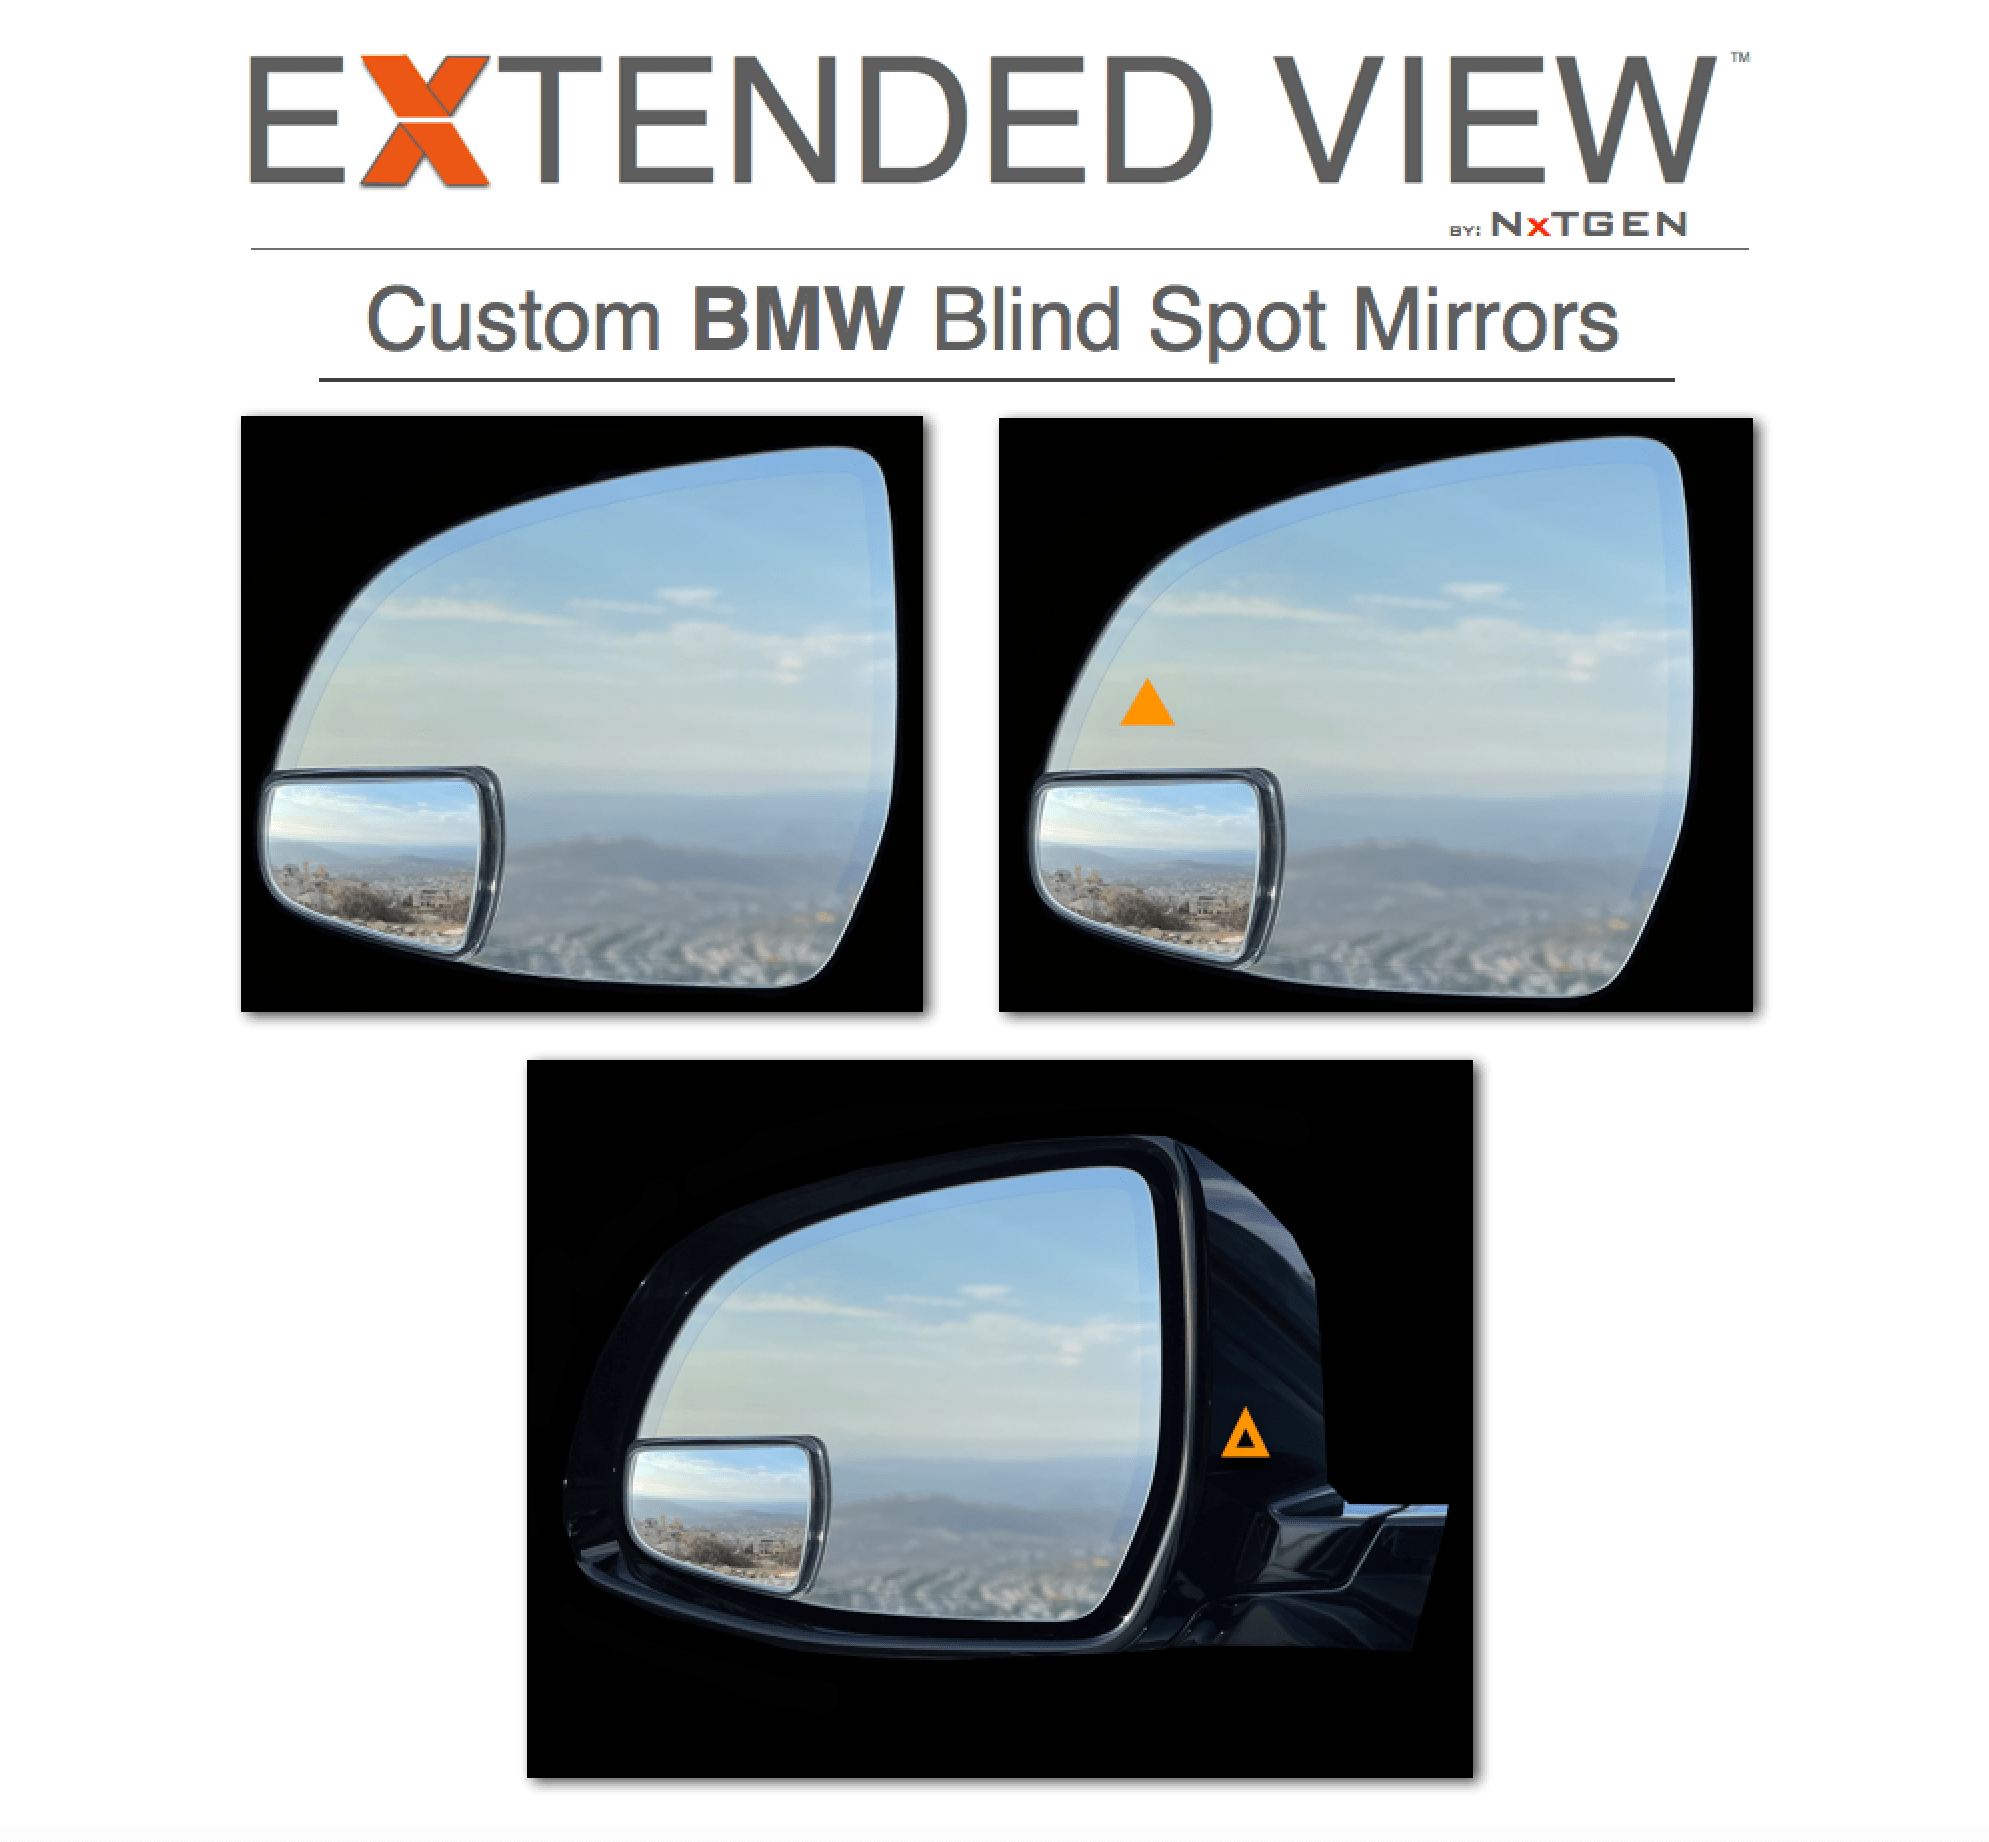 BMW X3 Extended View™